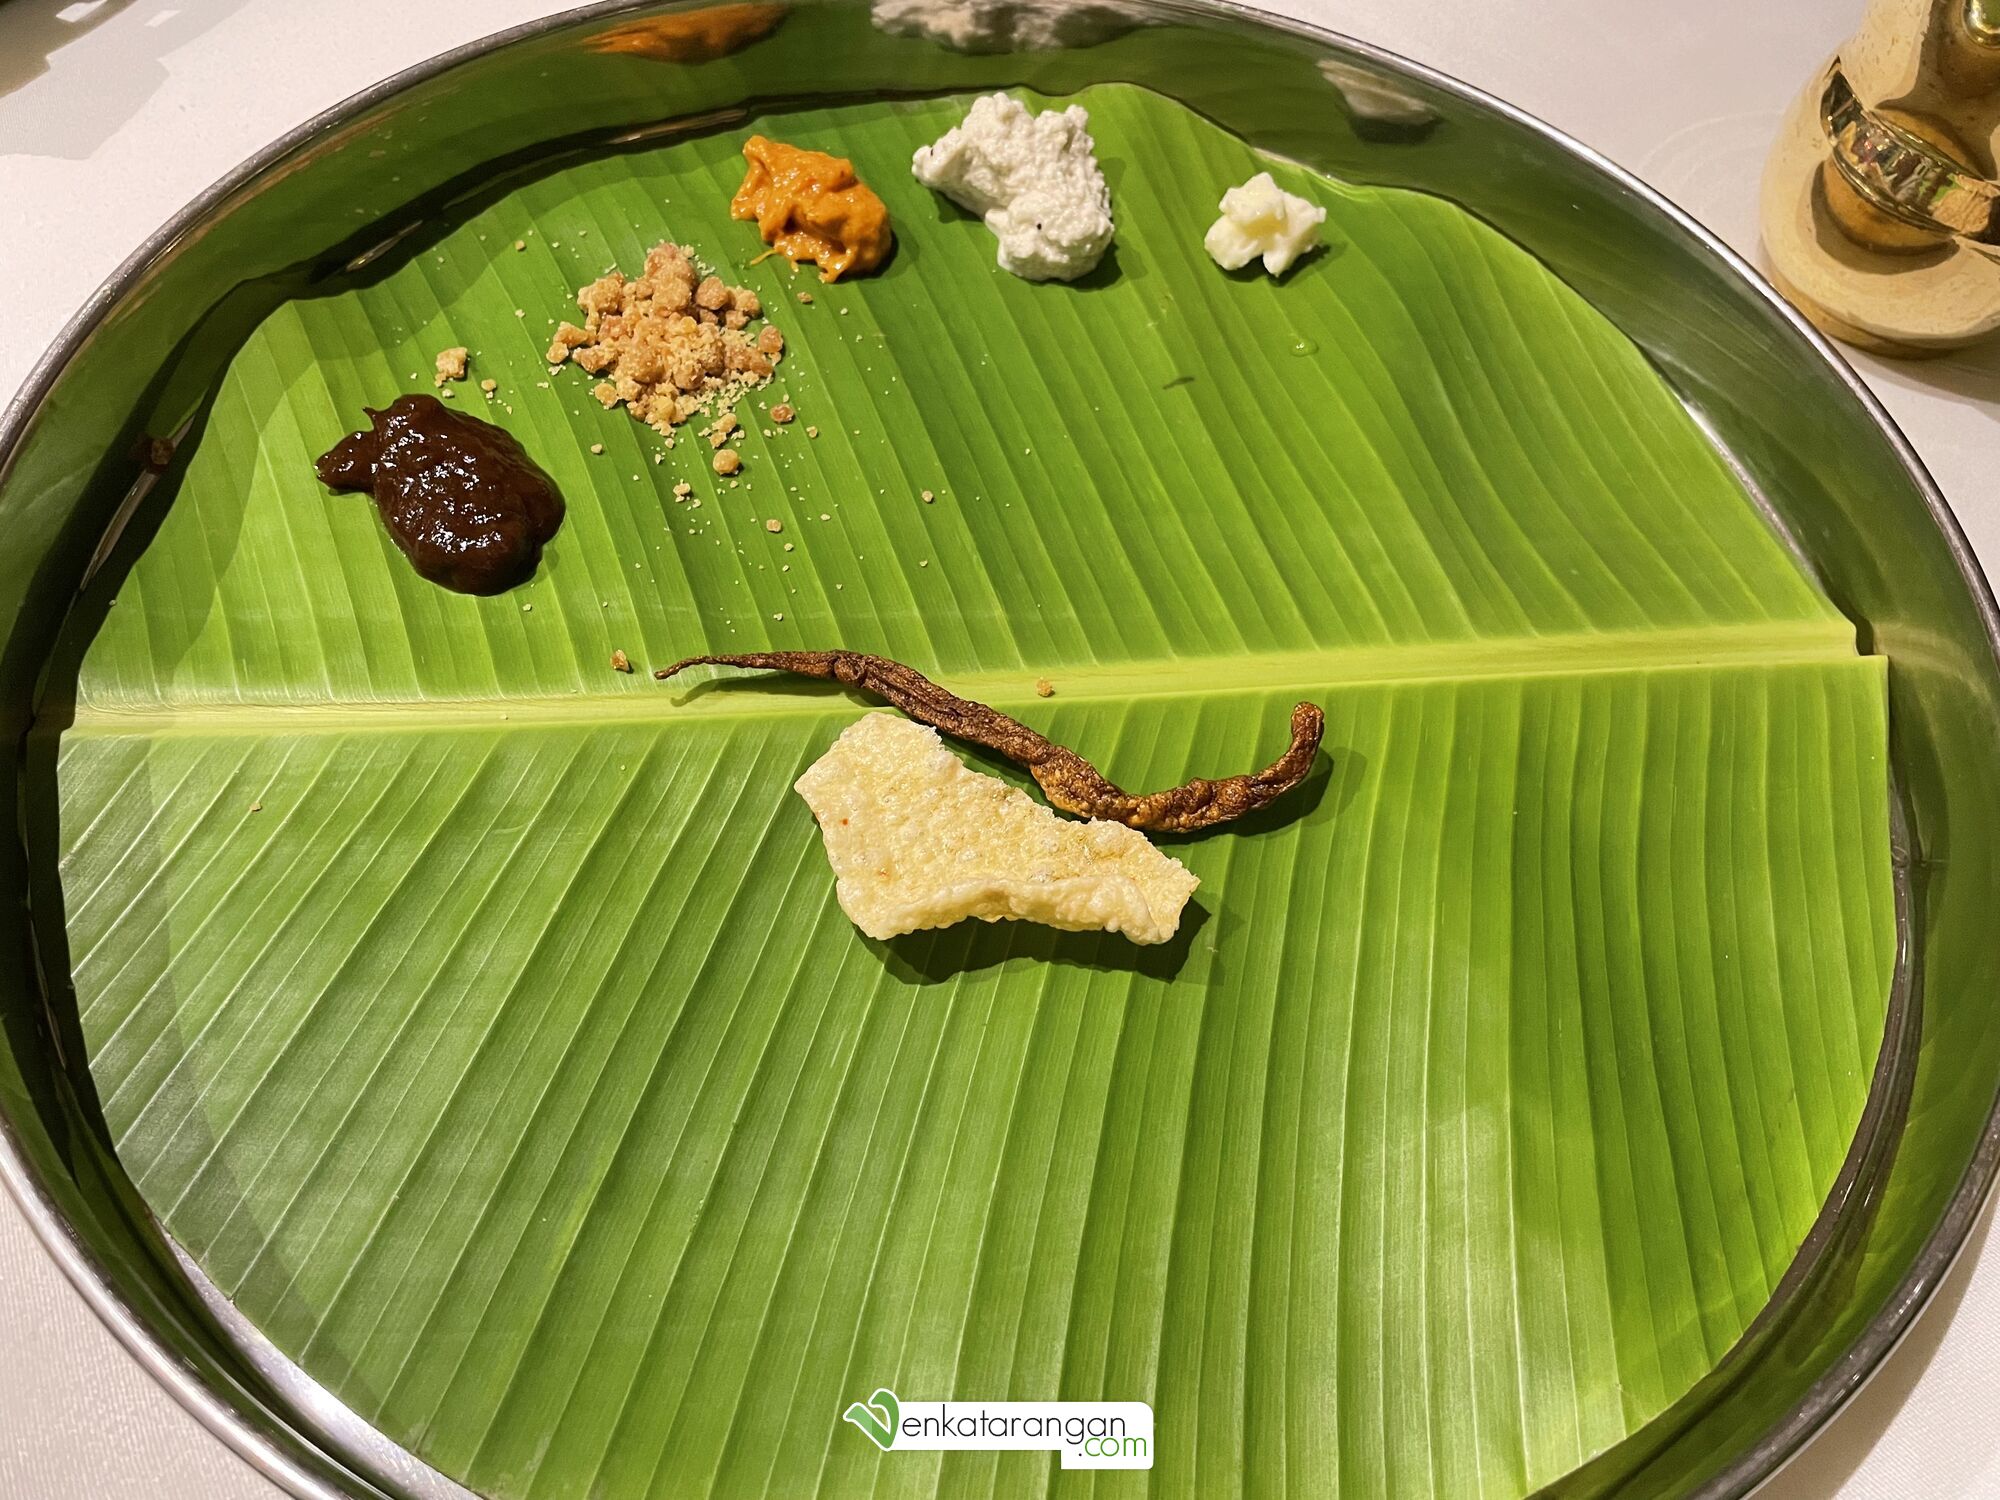 The starters in the vegetarian meal (thali) – Papad, Chutneys, Jaggery & Butter. This was followed by tiny Adai and Banana Dosai.